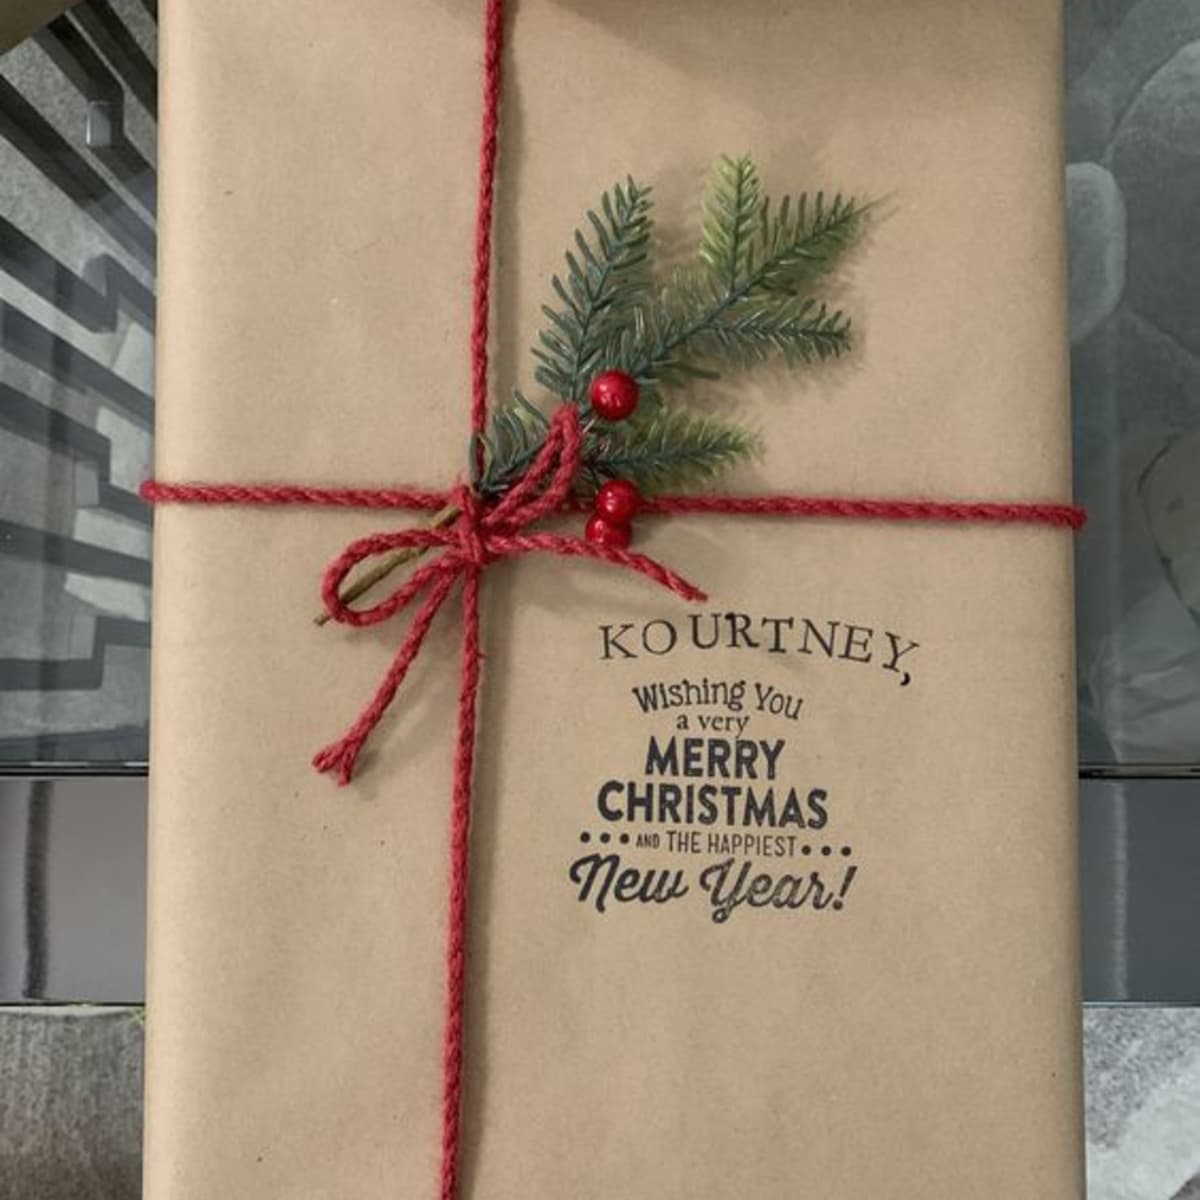 Creative Brown Paper Christmas Gift Wrapping Ideas for a Festive Touch